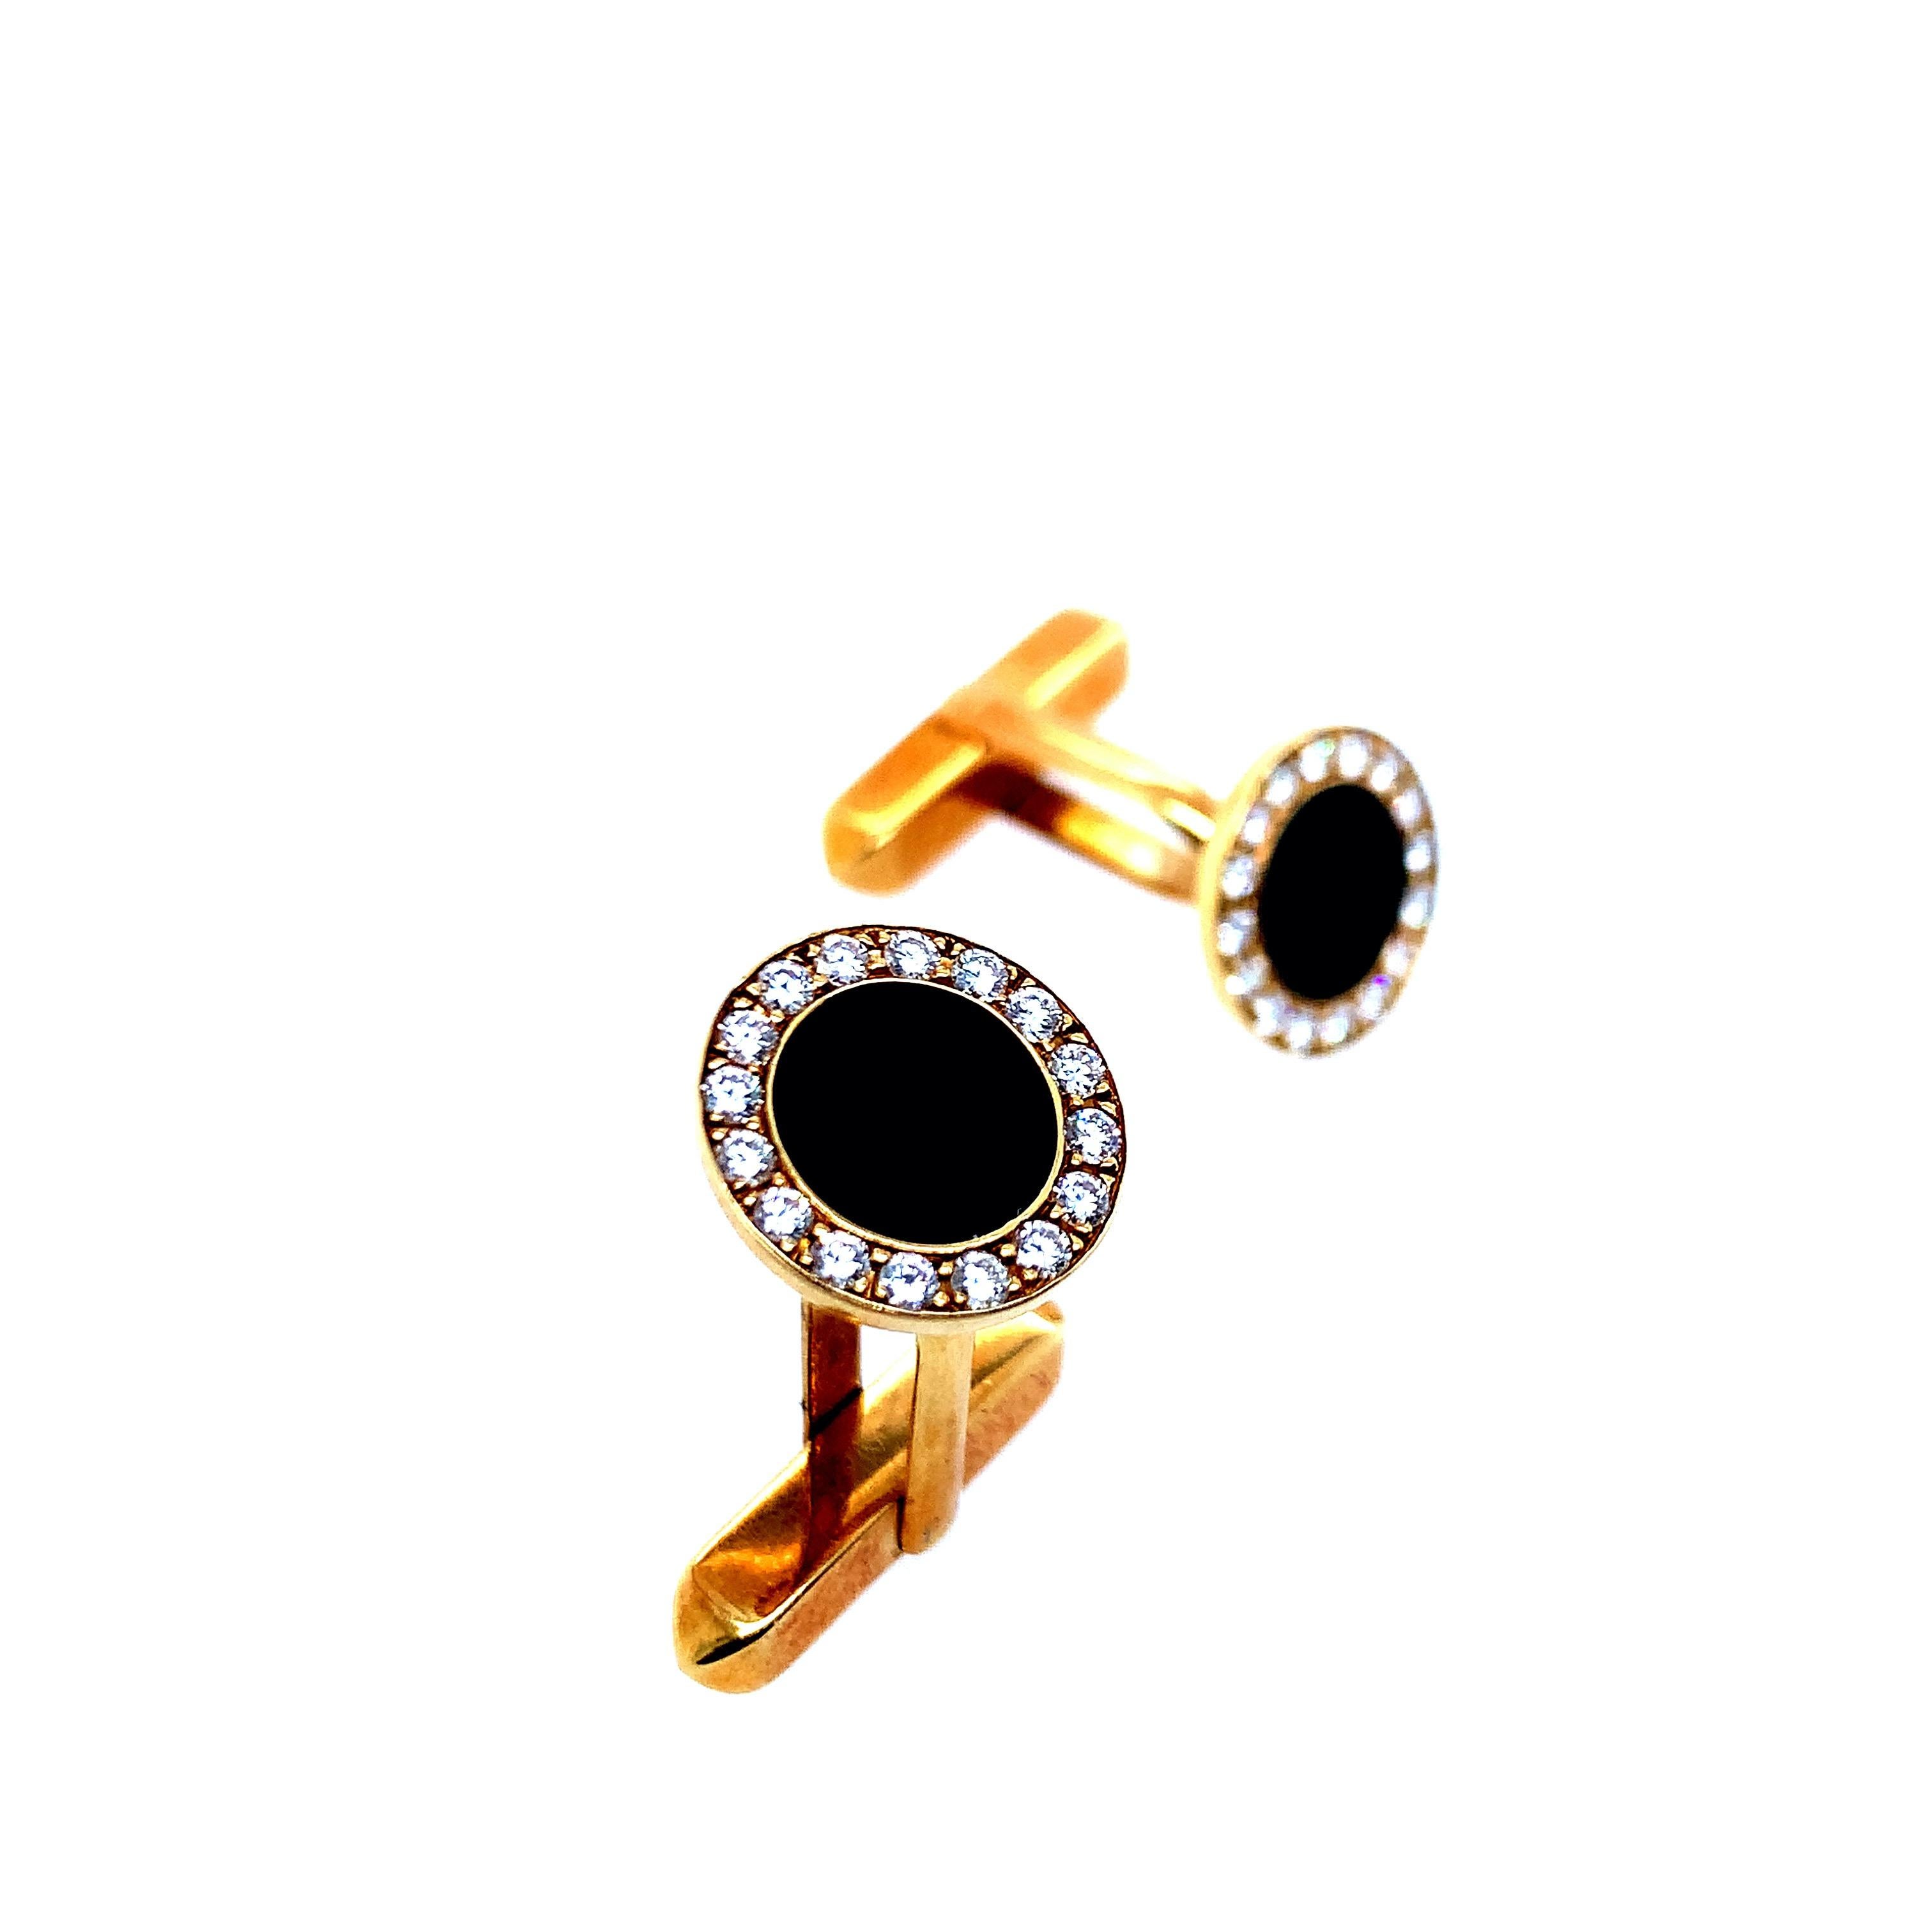 Bvlgari Diamond Onyx Cufflinks In Excellent Condition For Sale In New York, NY